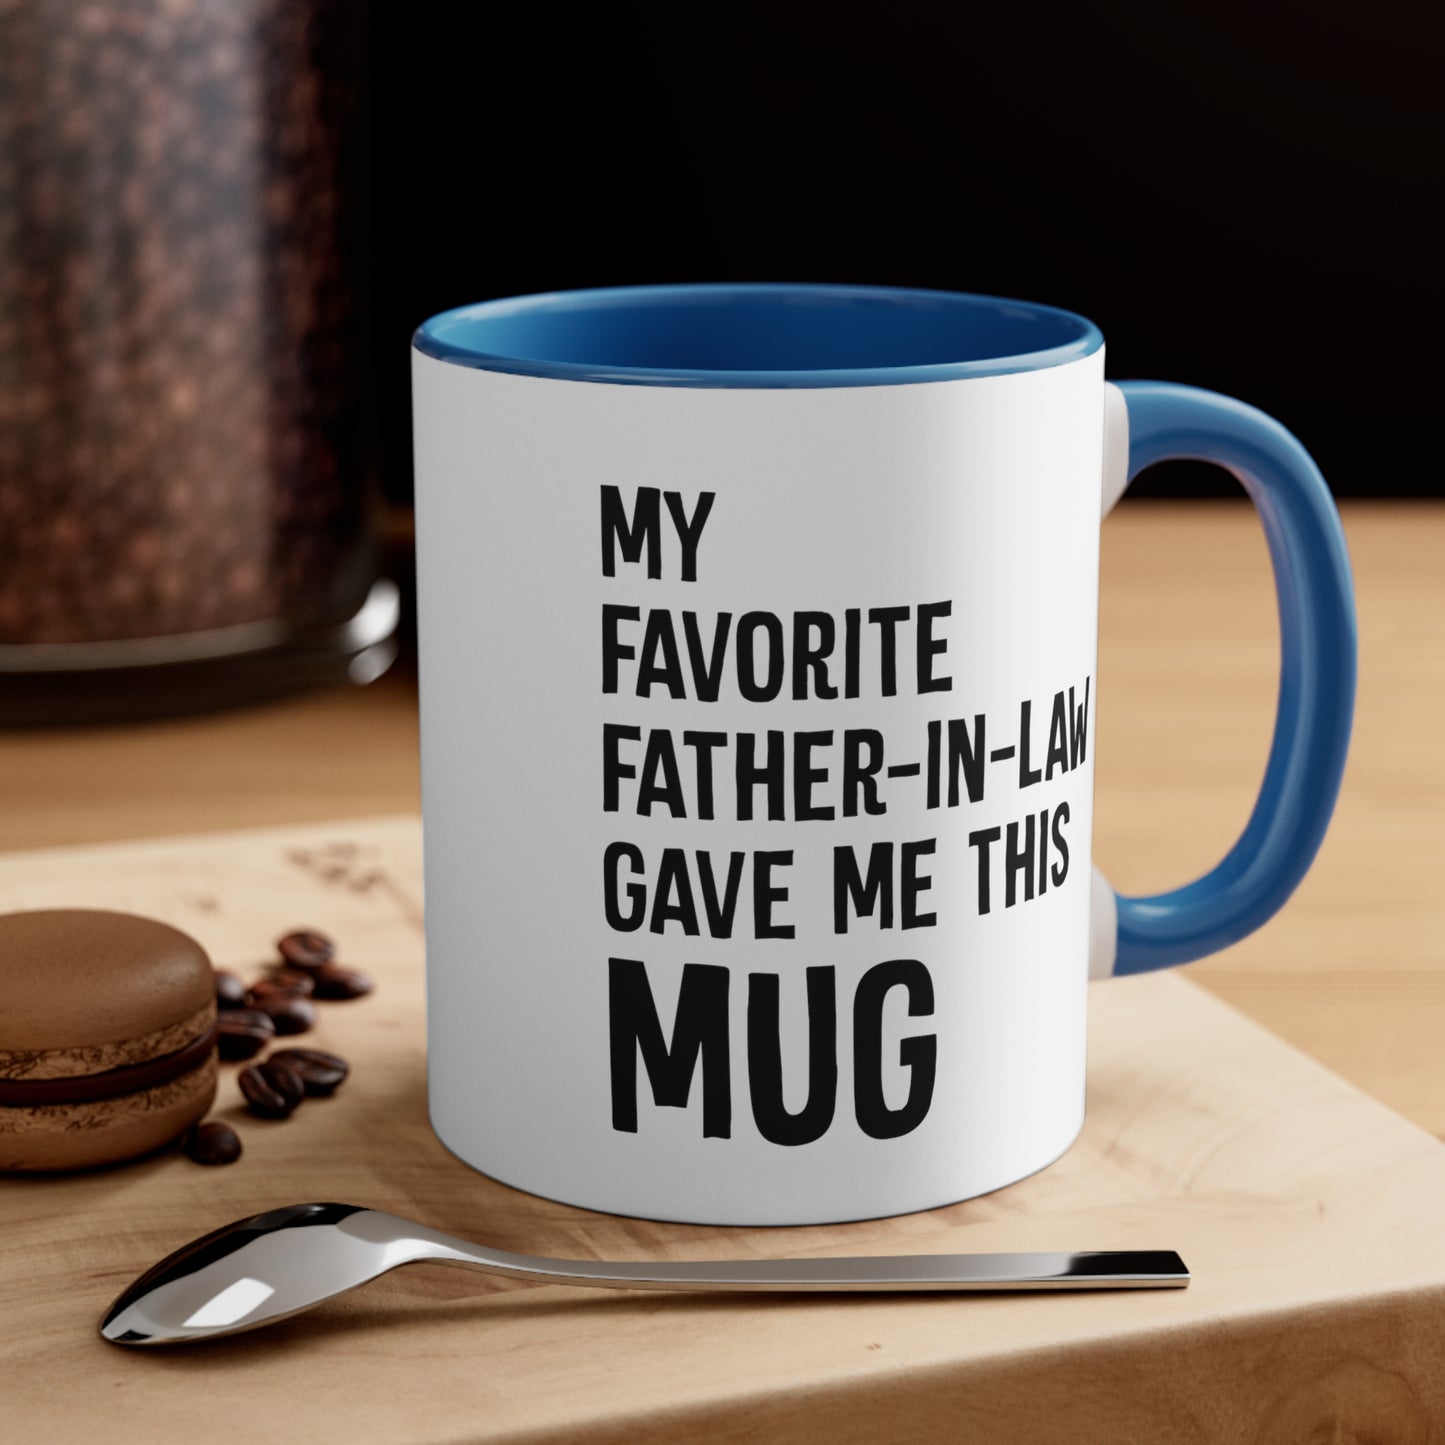 My Favorite Father-In-Law Gave Me This Mug Accent Coffee Mug, 11oz